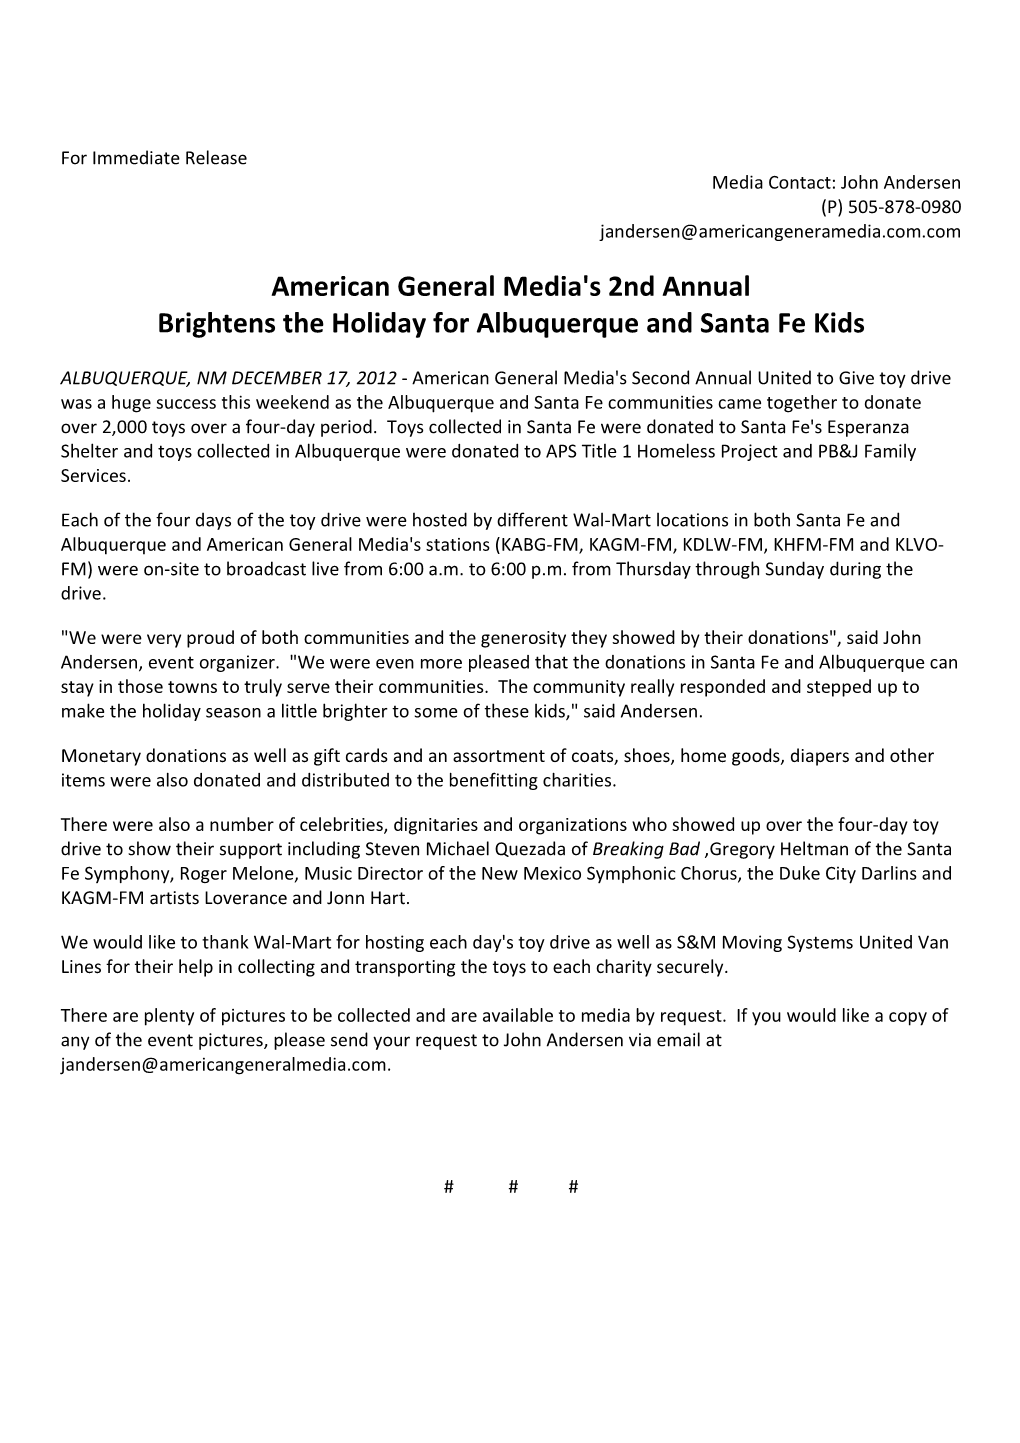 American General Media's 2Nd Annual Brightens the Holiday for Albuquerque and Santa Fe Kids